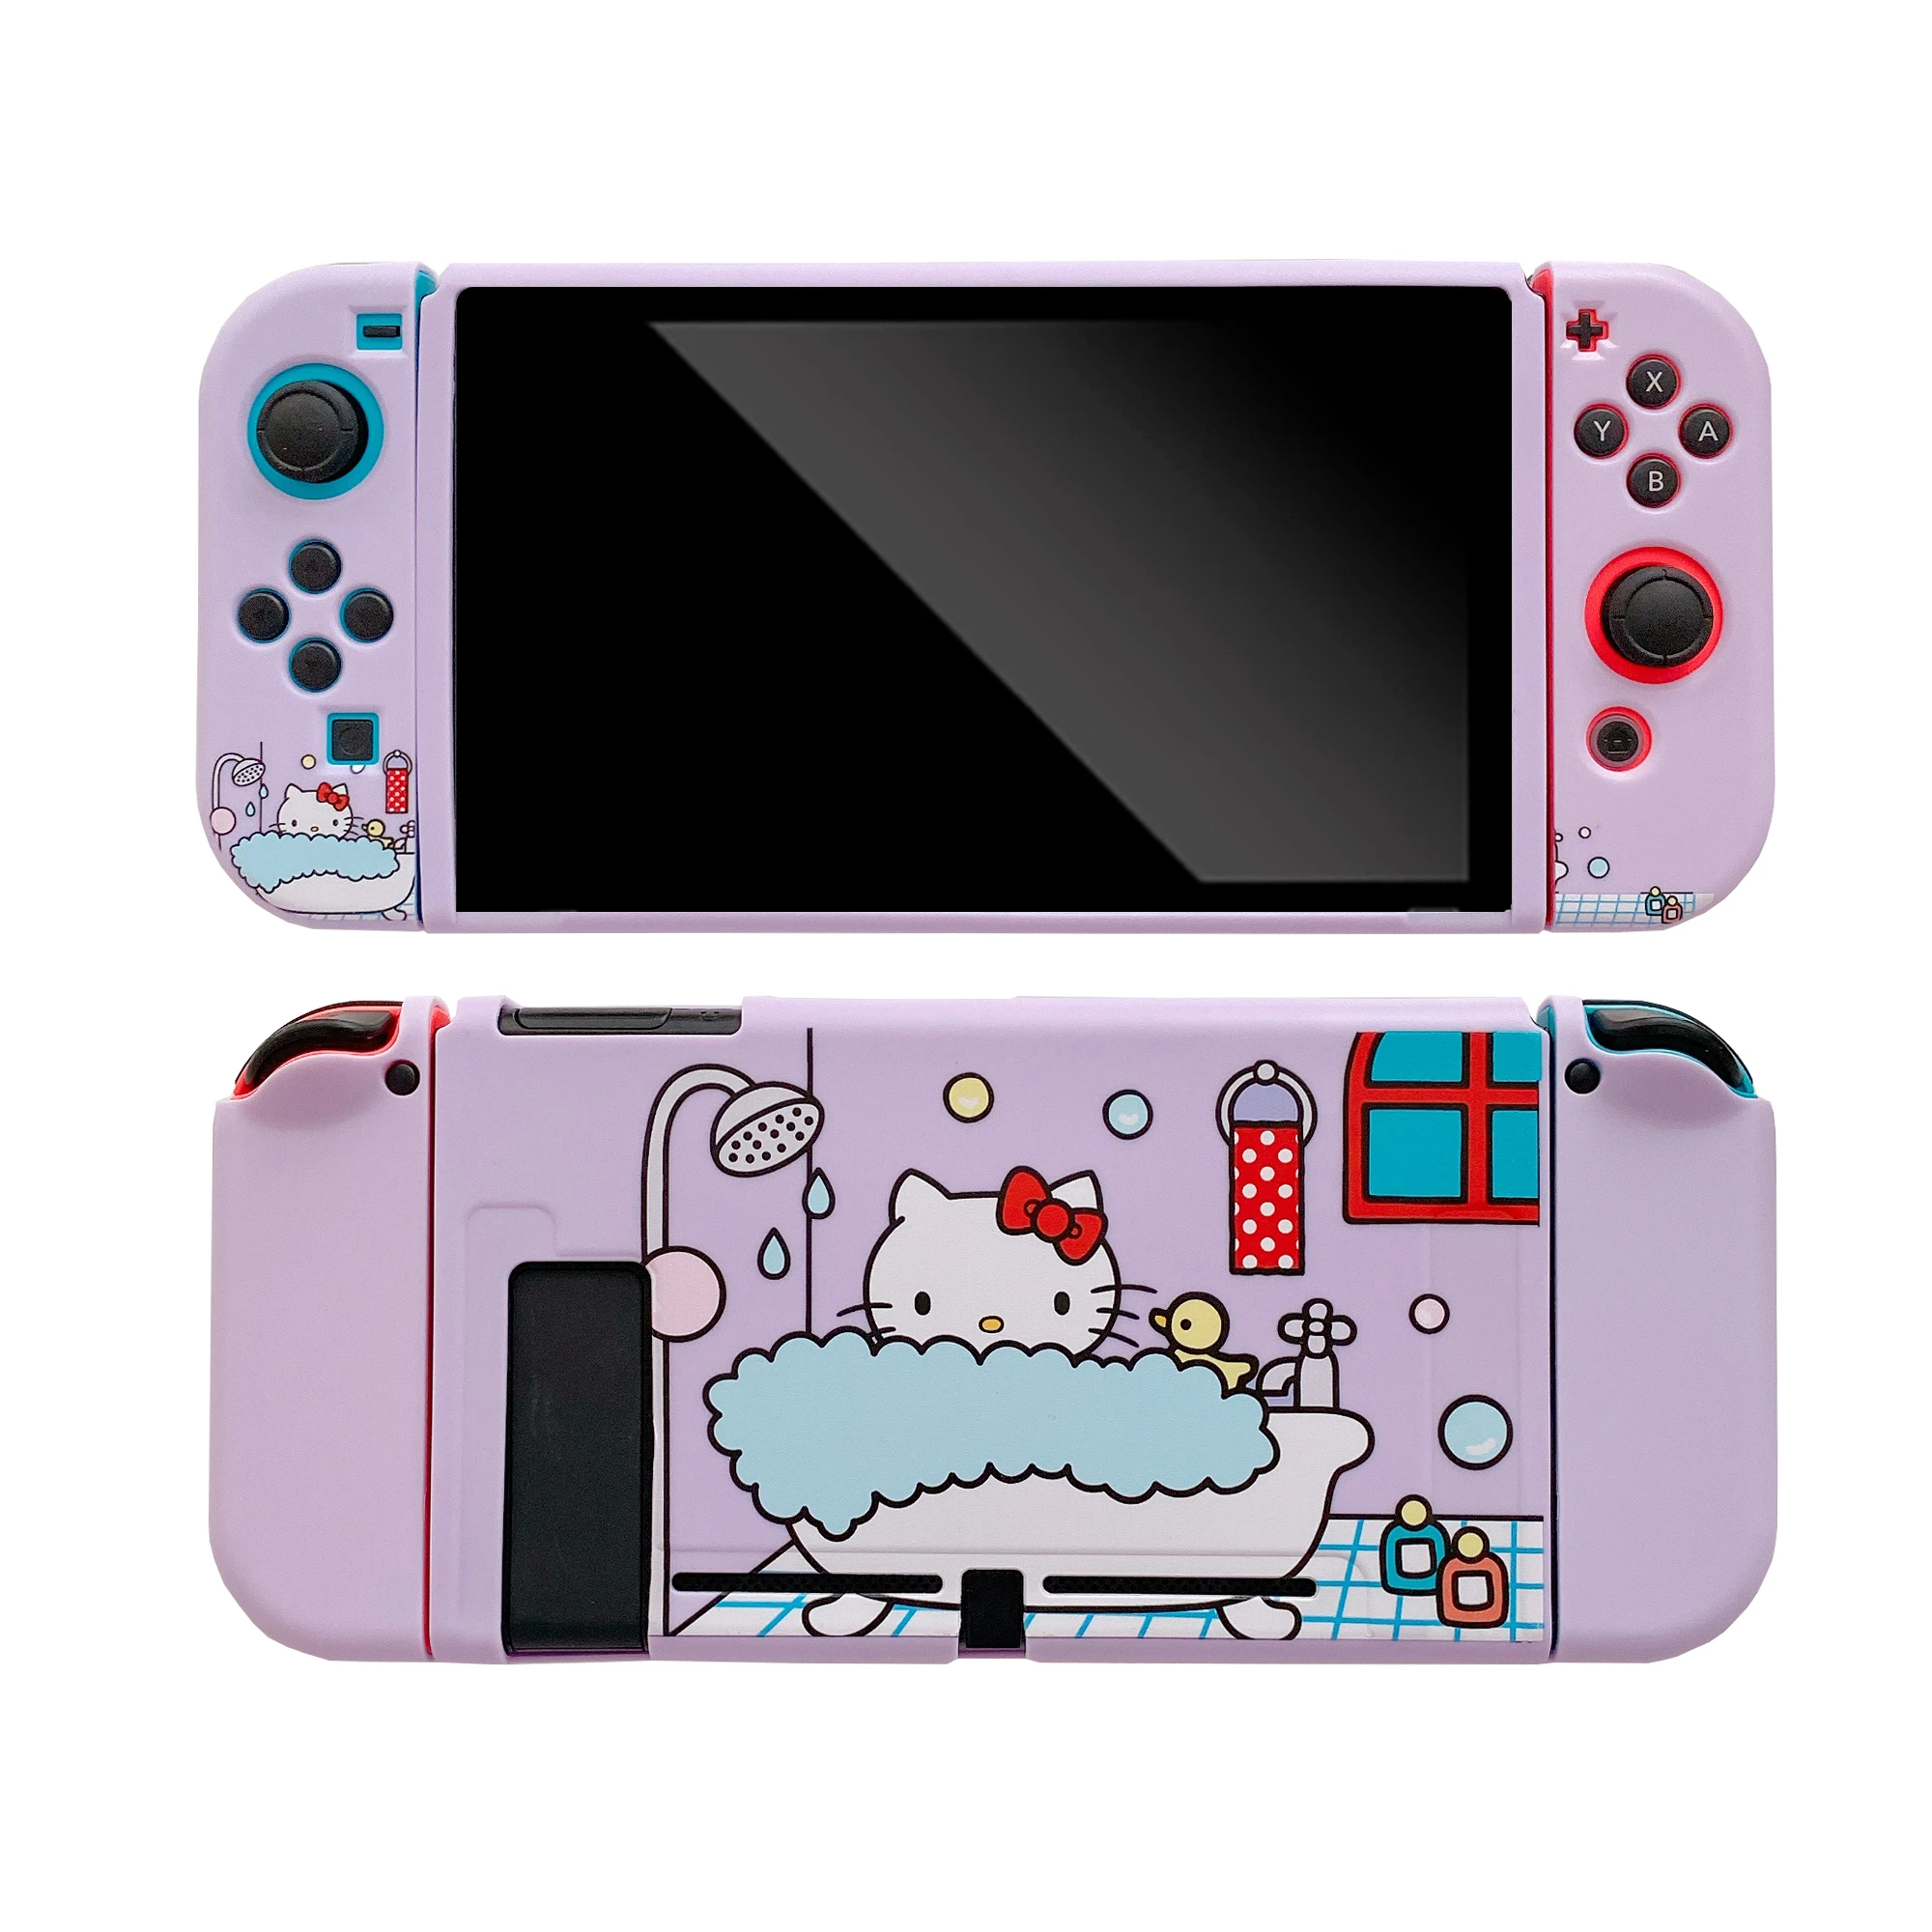 

Sanrio Hello Kitty Purple Gudetama XO Soft Phone Cases For Nintendo Switch Game Console Controller OLED Gaming Accessories